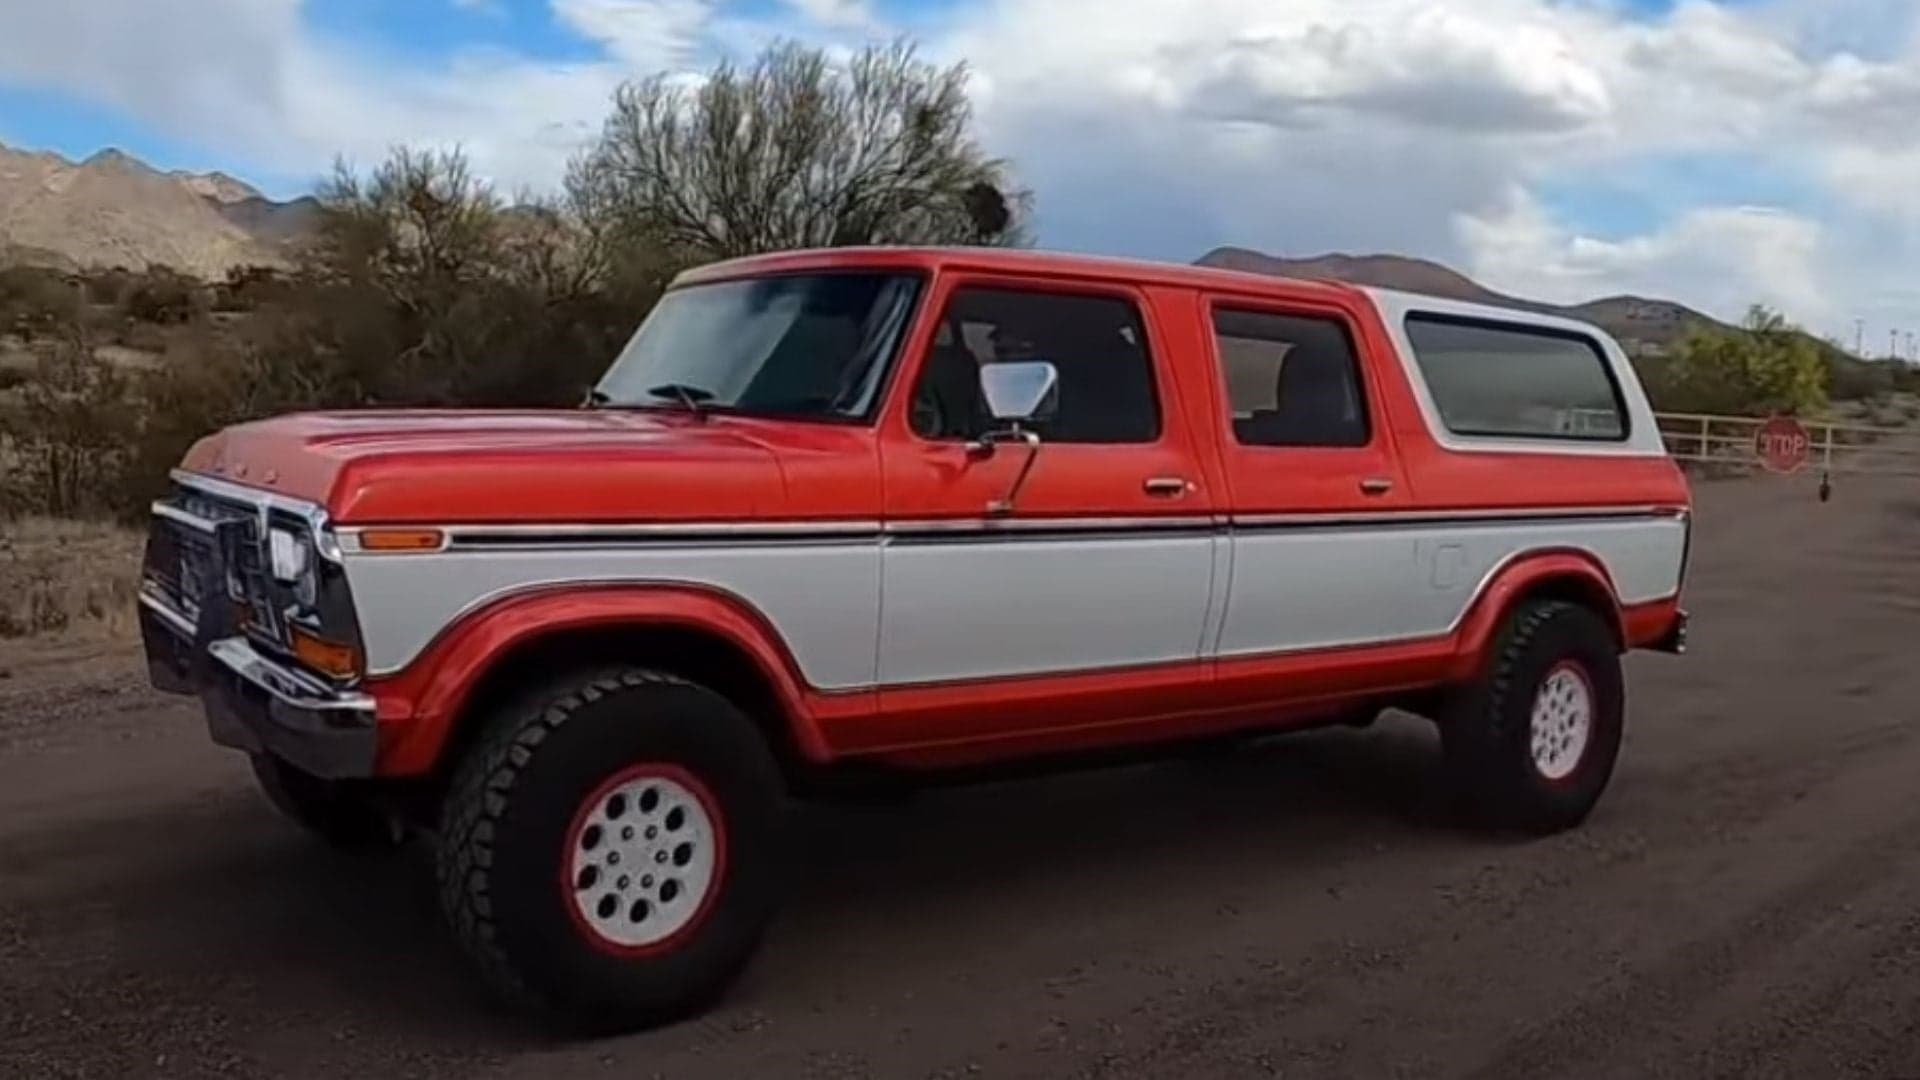 This 1979 Ford Bronco Four-Door Is a Supercharged F150 Raptor Underneath